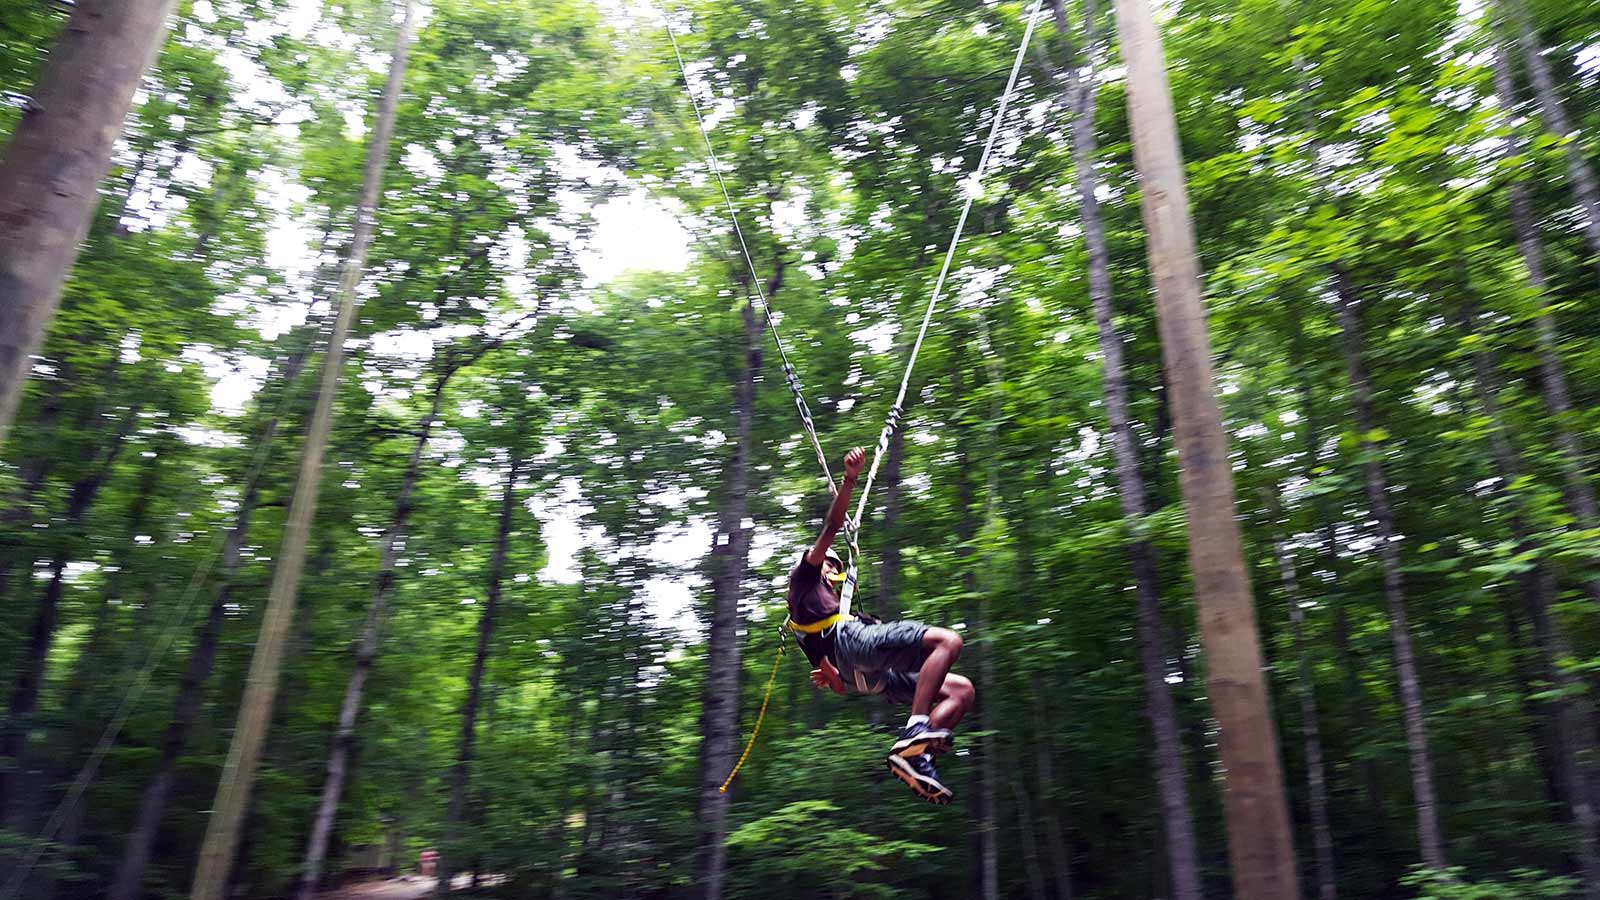 Summer Camper on the zip line in motion - NaCoMe Camp & Conference Center